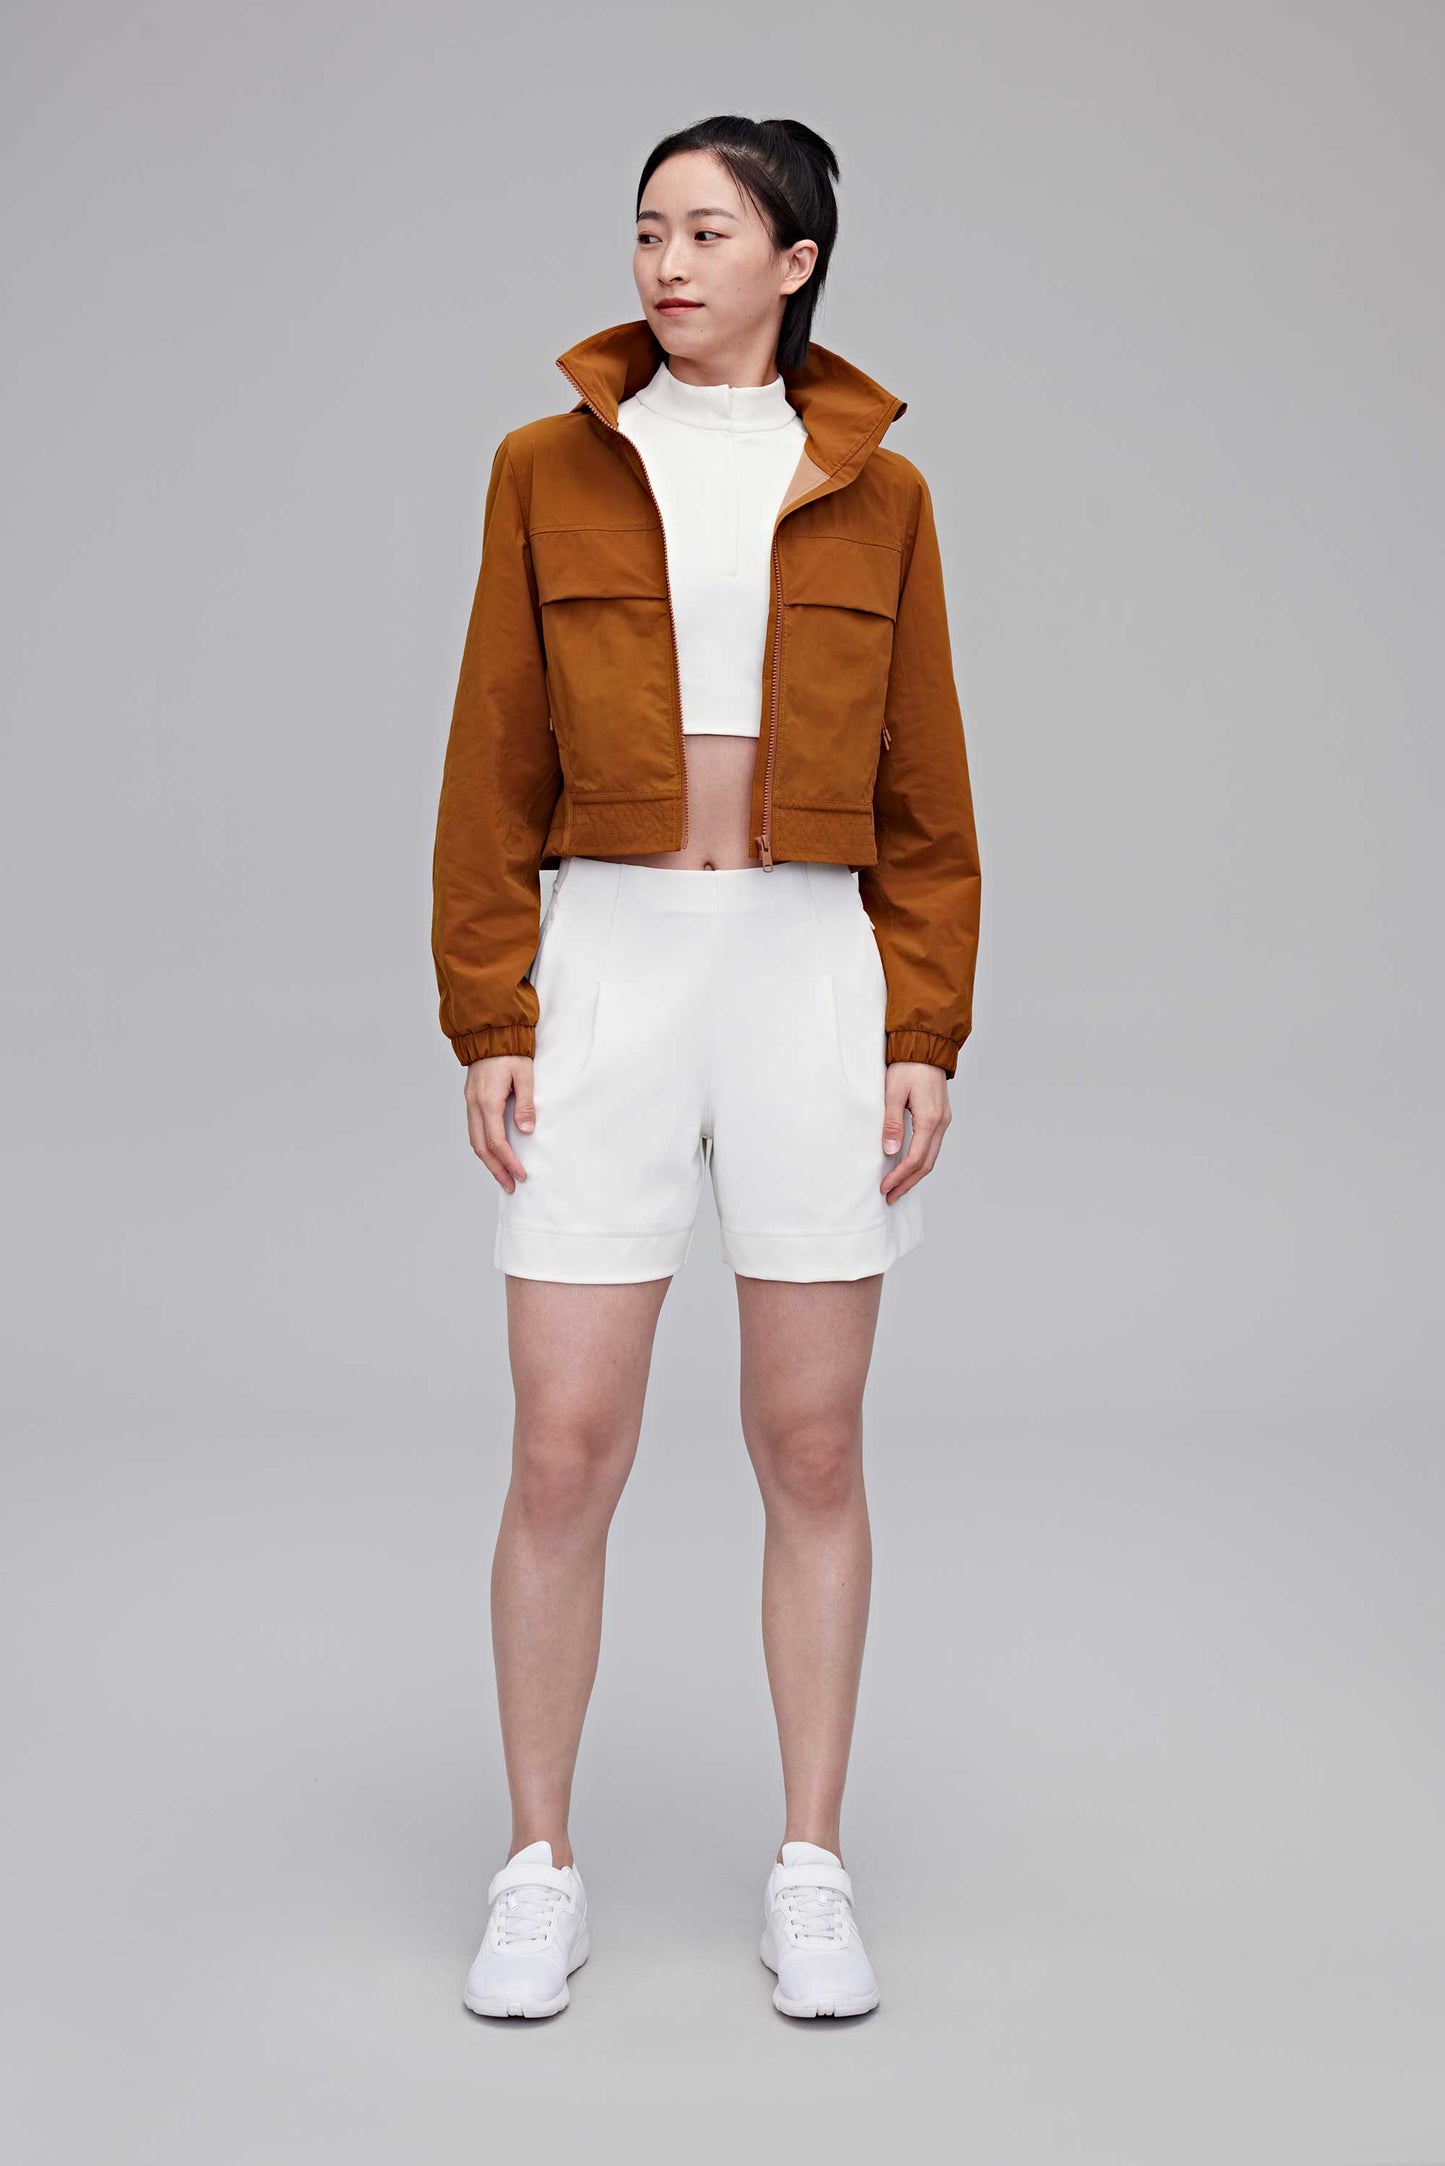 woman in brown jacket and white shorts